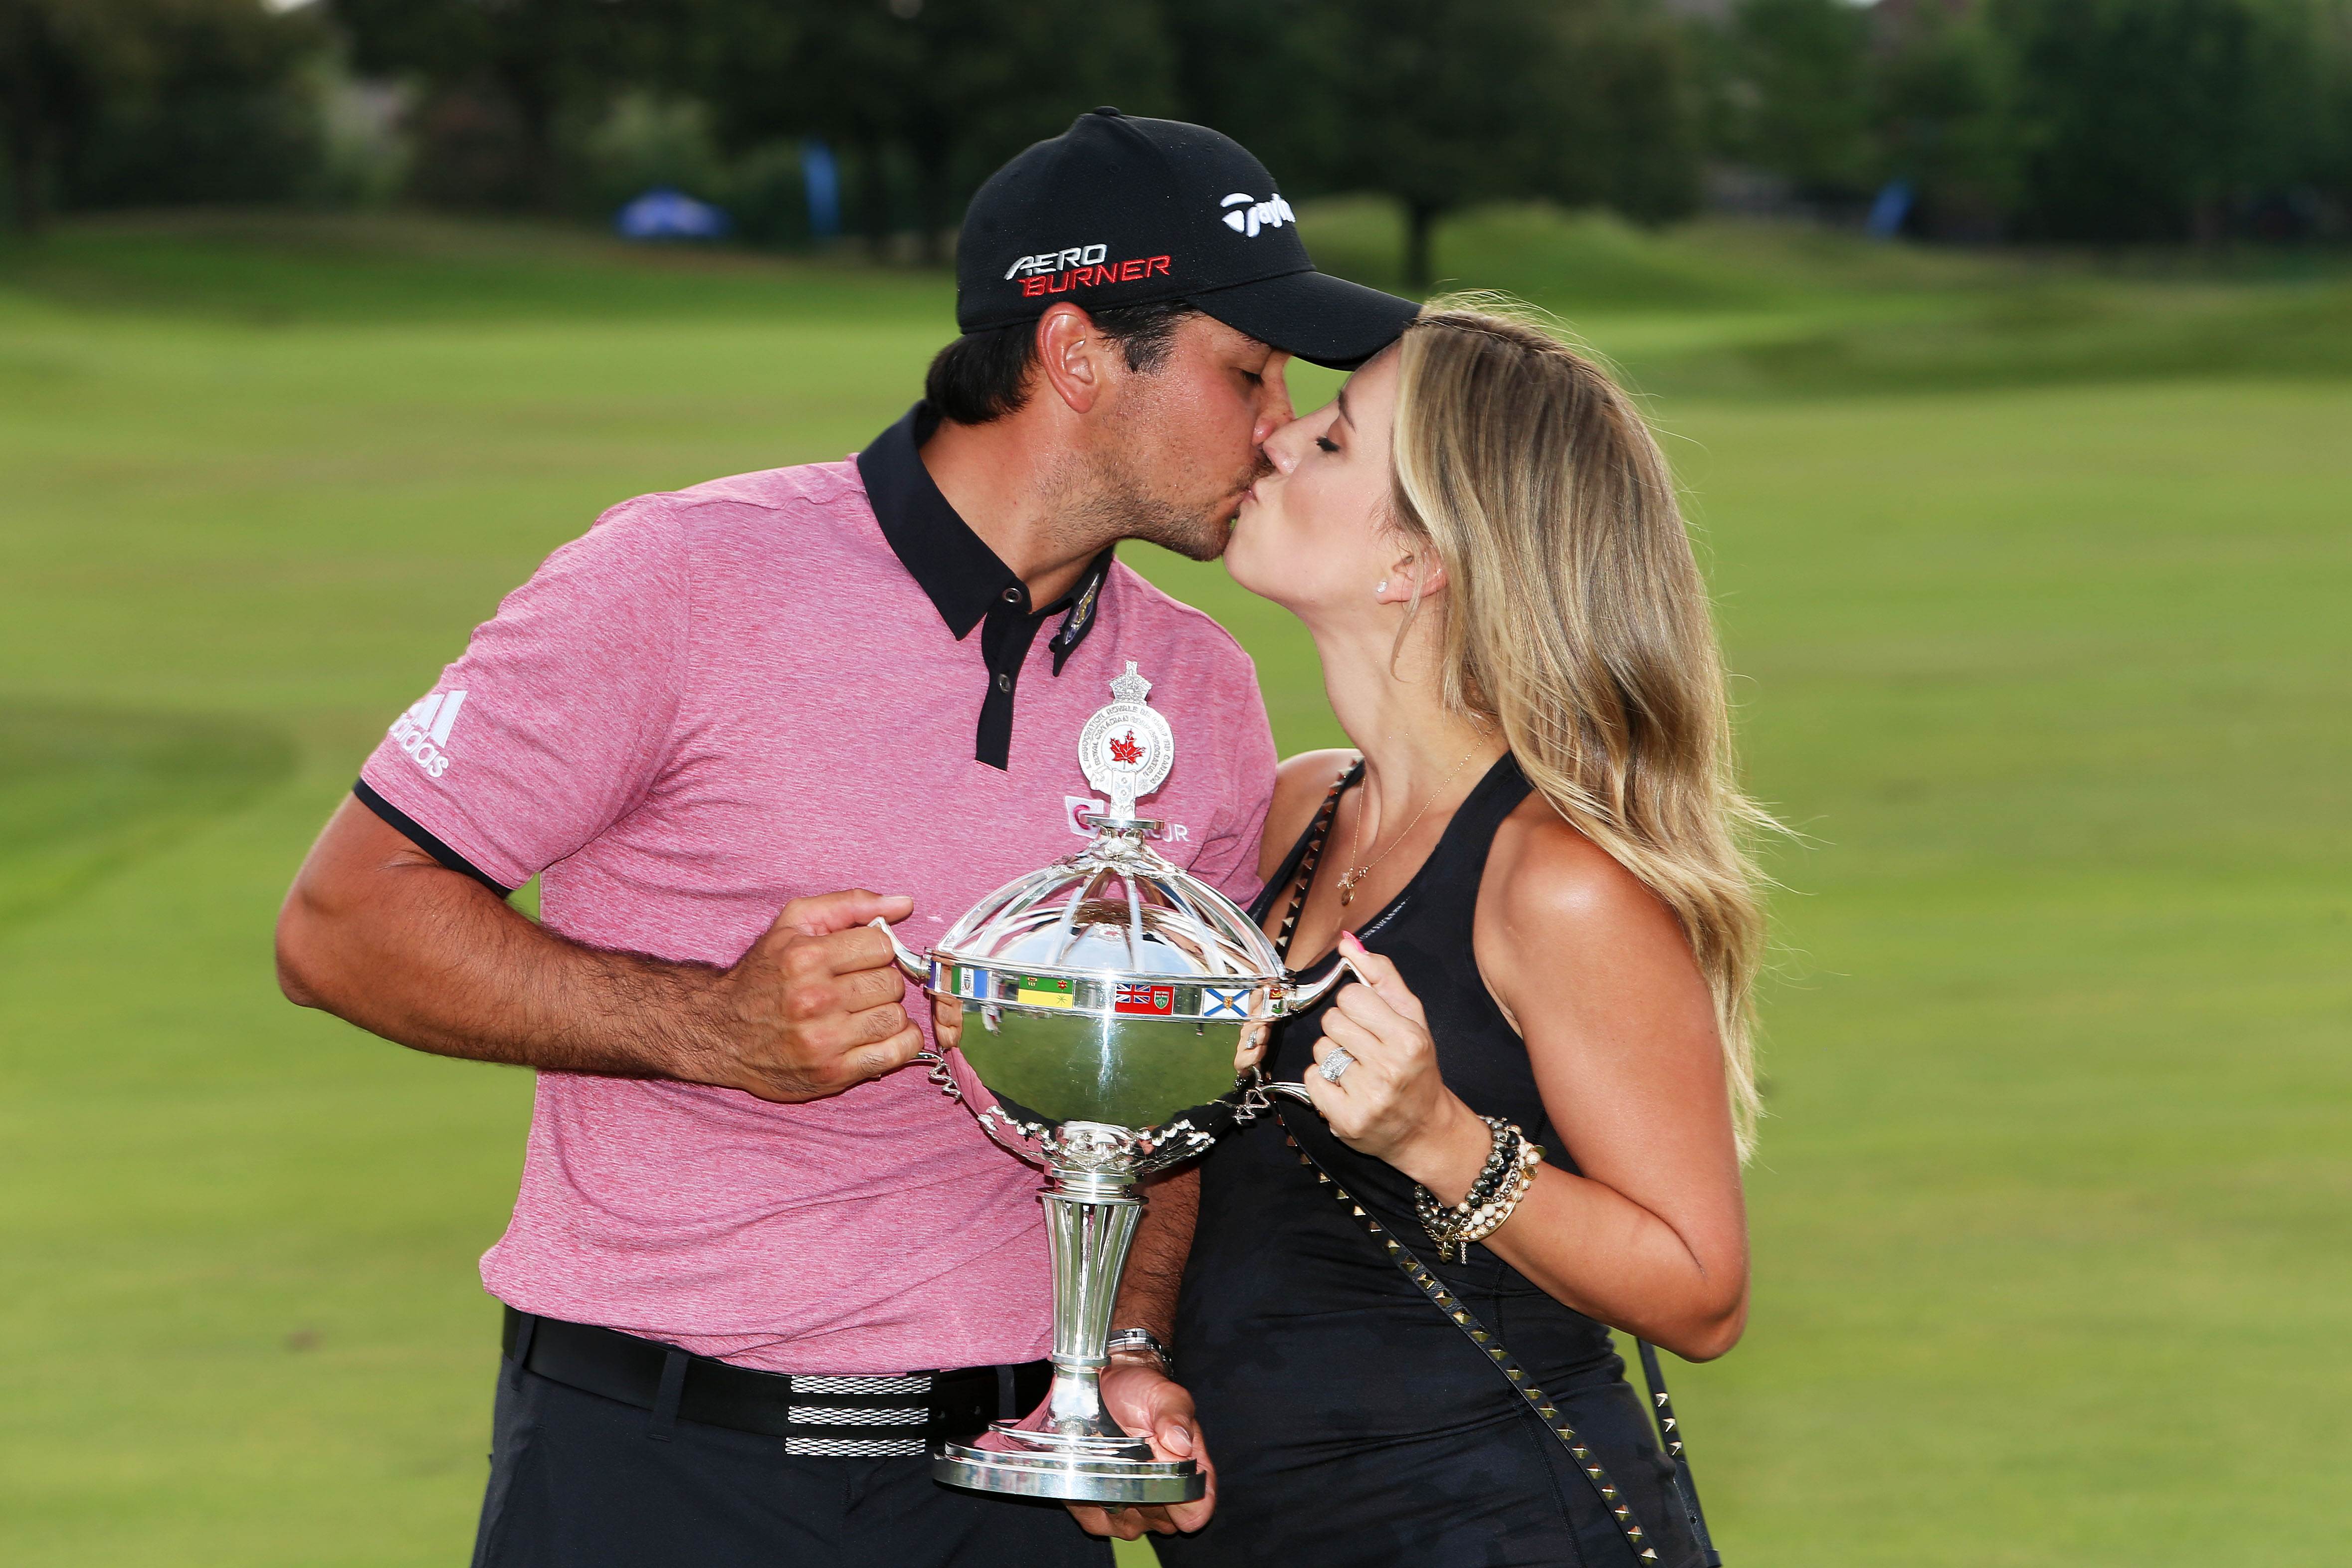 Australia's Jason Day celebrates the winner's trophy with his wife after winning the RBC Canadian Open at the Glen Abbey Golf Club in Oakville on Sunday. Photo: AFP